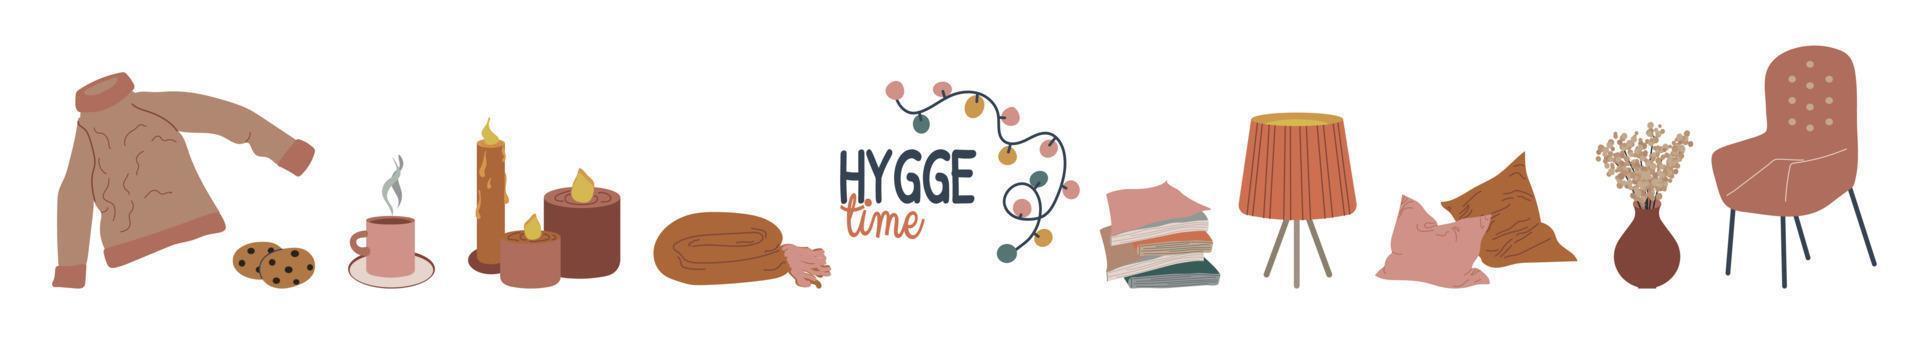 Hygge time autumn and winter set vector illustration